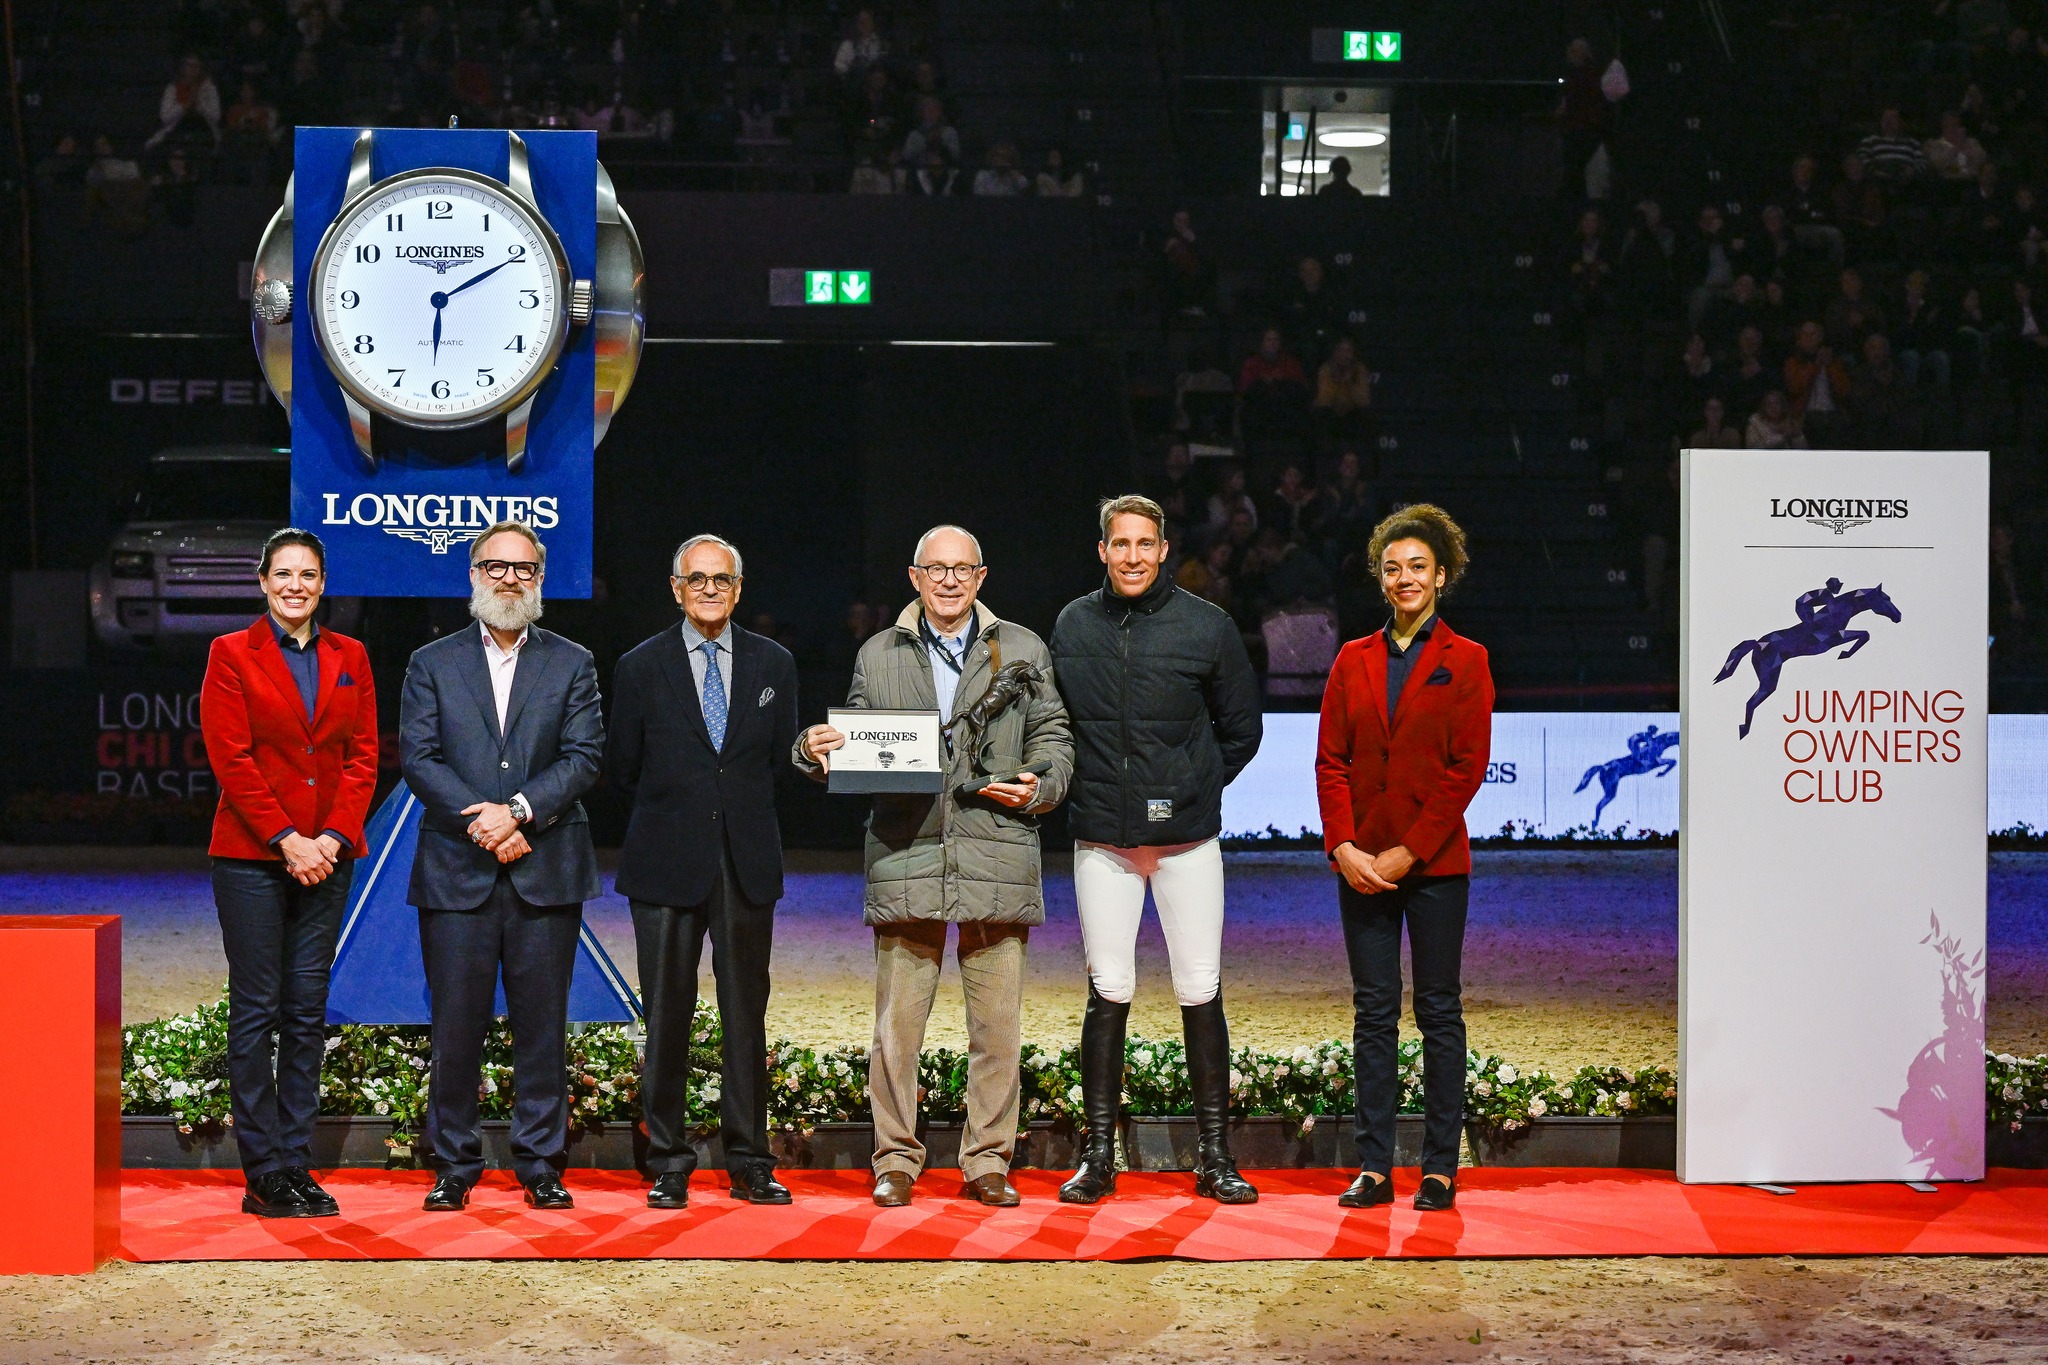 Georg Kähny rewarded as Longines owner of the year!